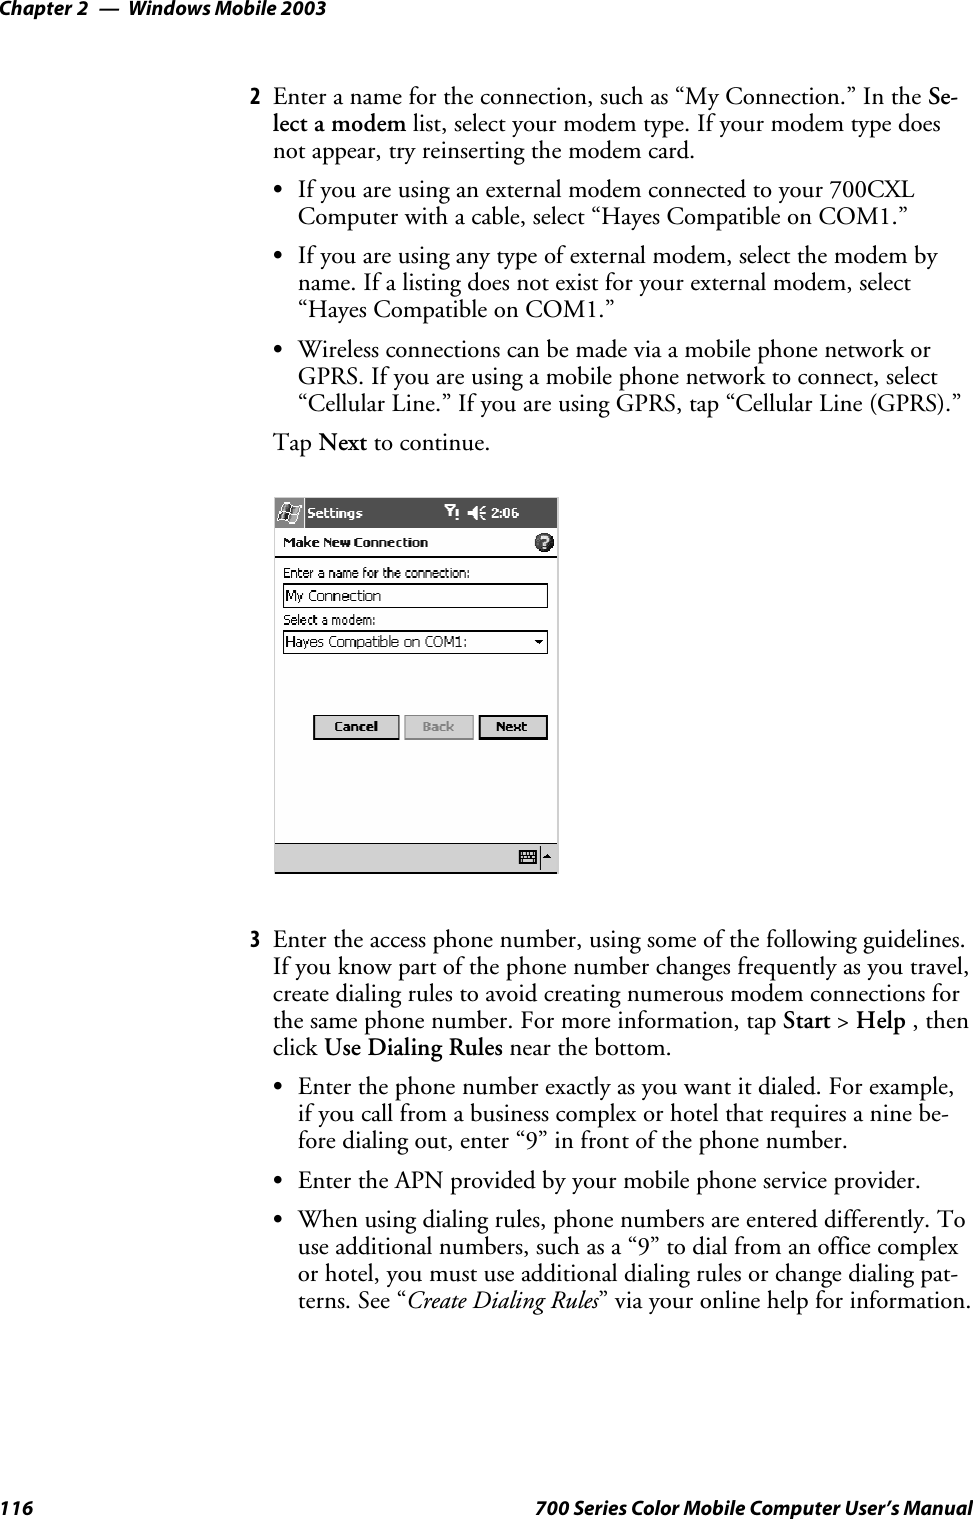 Windows Mobile 2003Chapter —2116 700 Series Color Mobile Computer User’s Manual2Enter a name for the connection, such as “My Connection.” In the Se-lect a modem list, select your modem type. If your modem type doesnot appear, try reinserting the modem card.SIf you are using an external modem connected to your 700CXLComputer with a cable, select “Hayes Compatible on COM1.”SIf you are using any type of external modem, select the modem byname. If a listing does not exist for your external modem, select“Hayes Compatible on COM1.”SWireless connections can be made via a mobile phone network orGPRS. If you are using a mobile phone network to connect, select“Cellular Line.” If you are using GPRS, tap “Cellular Line (GPRS).”Tap Next to continue.3Enter the access phone number, using some of the following guidelines.If you know part of the phone number changes frequently as you travel,create dialing rules to avoid creating numerous modem connections forthe same phone number. For more information, tap Start &gt;Help ,thenclick Use Dialing Rules near the bottom.SEnterthephonenumberexactlyasyouwantitdialed.Forexample,if you call from a business complex or hotel that requires a nine be-fore dialing out, enter “9” in front of the phone number.SEnter the APN provided by your mobile phone service provider.SWhen using dialing rules, phone numbers are entered differently. Touse additional numbers, such as a “9” to dial from an office complexor hotel, you must use additional dialing rules or change dialing pat-terns. See “Create Dialing Rules” via your online help for information.